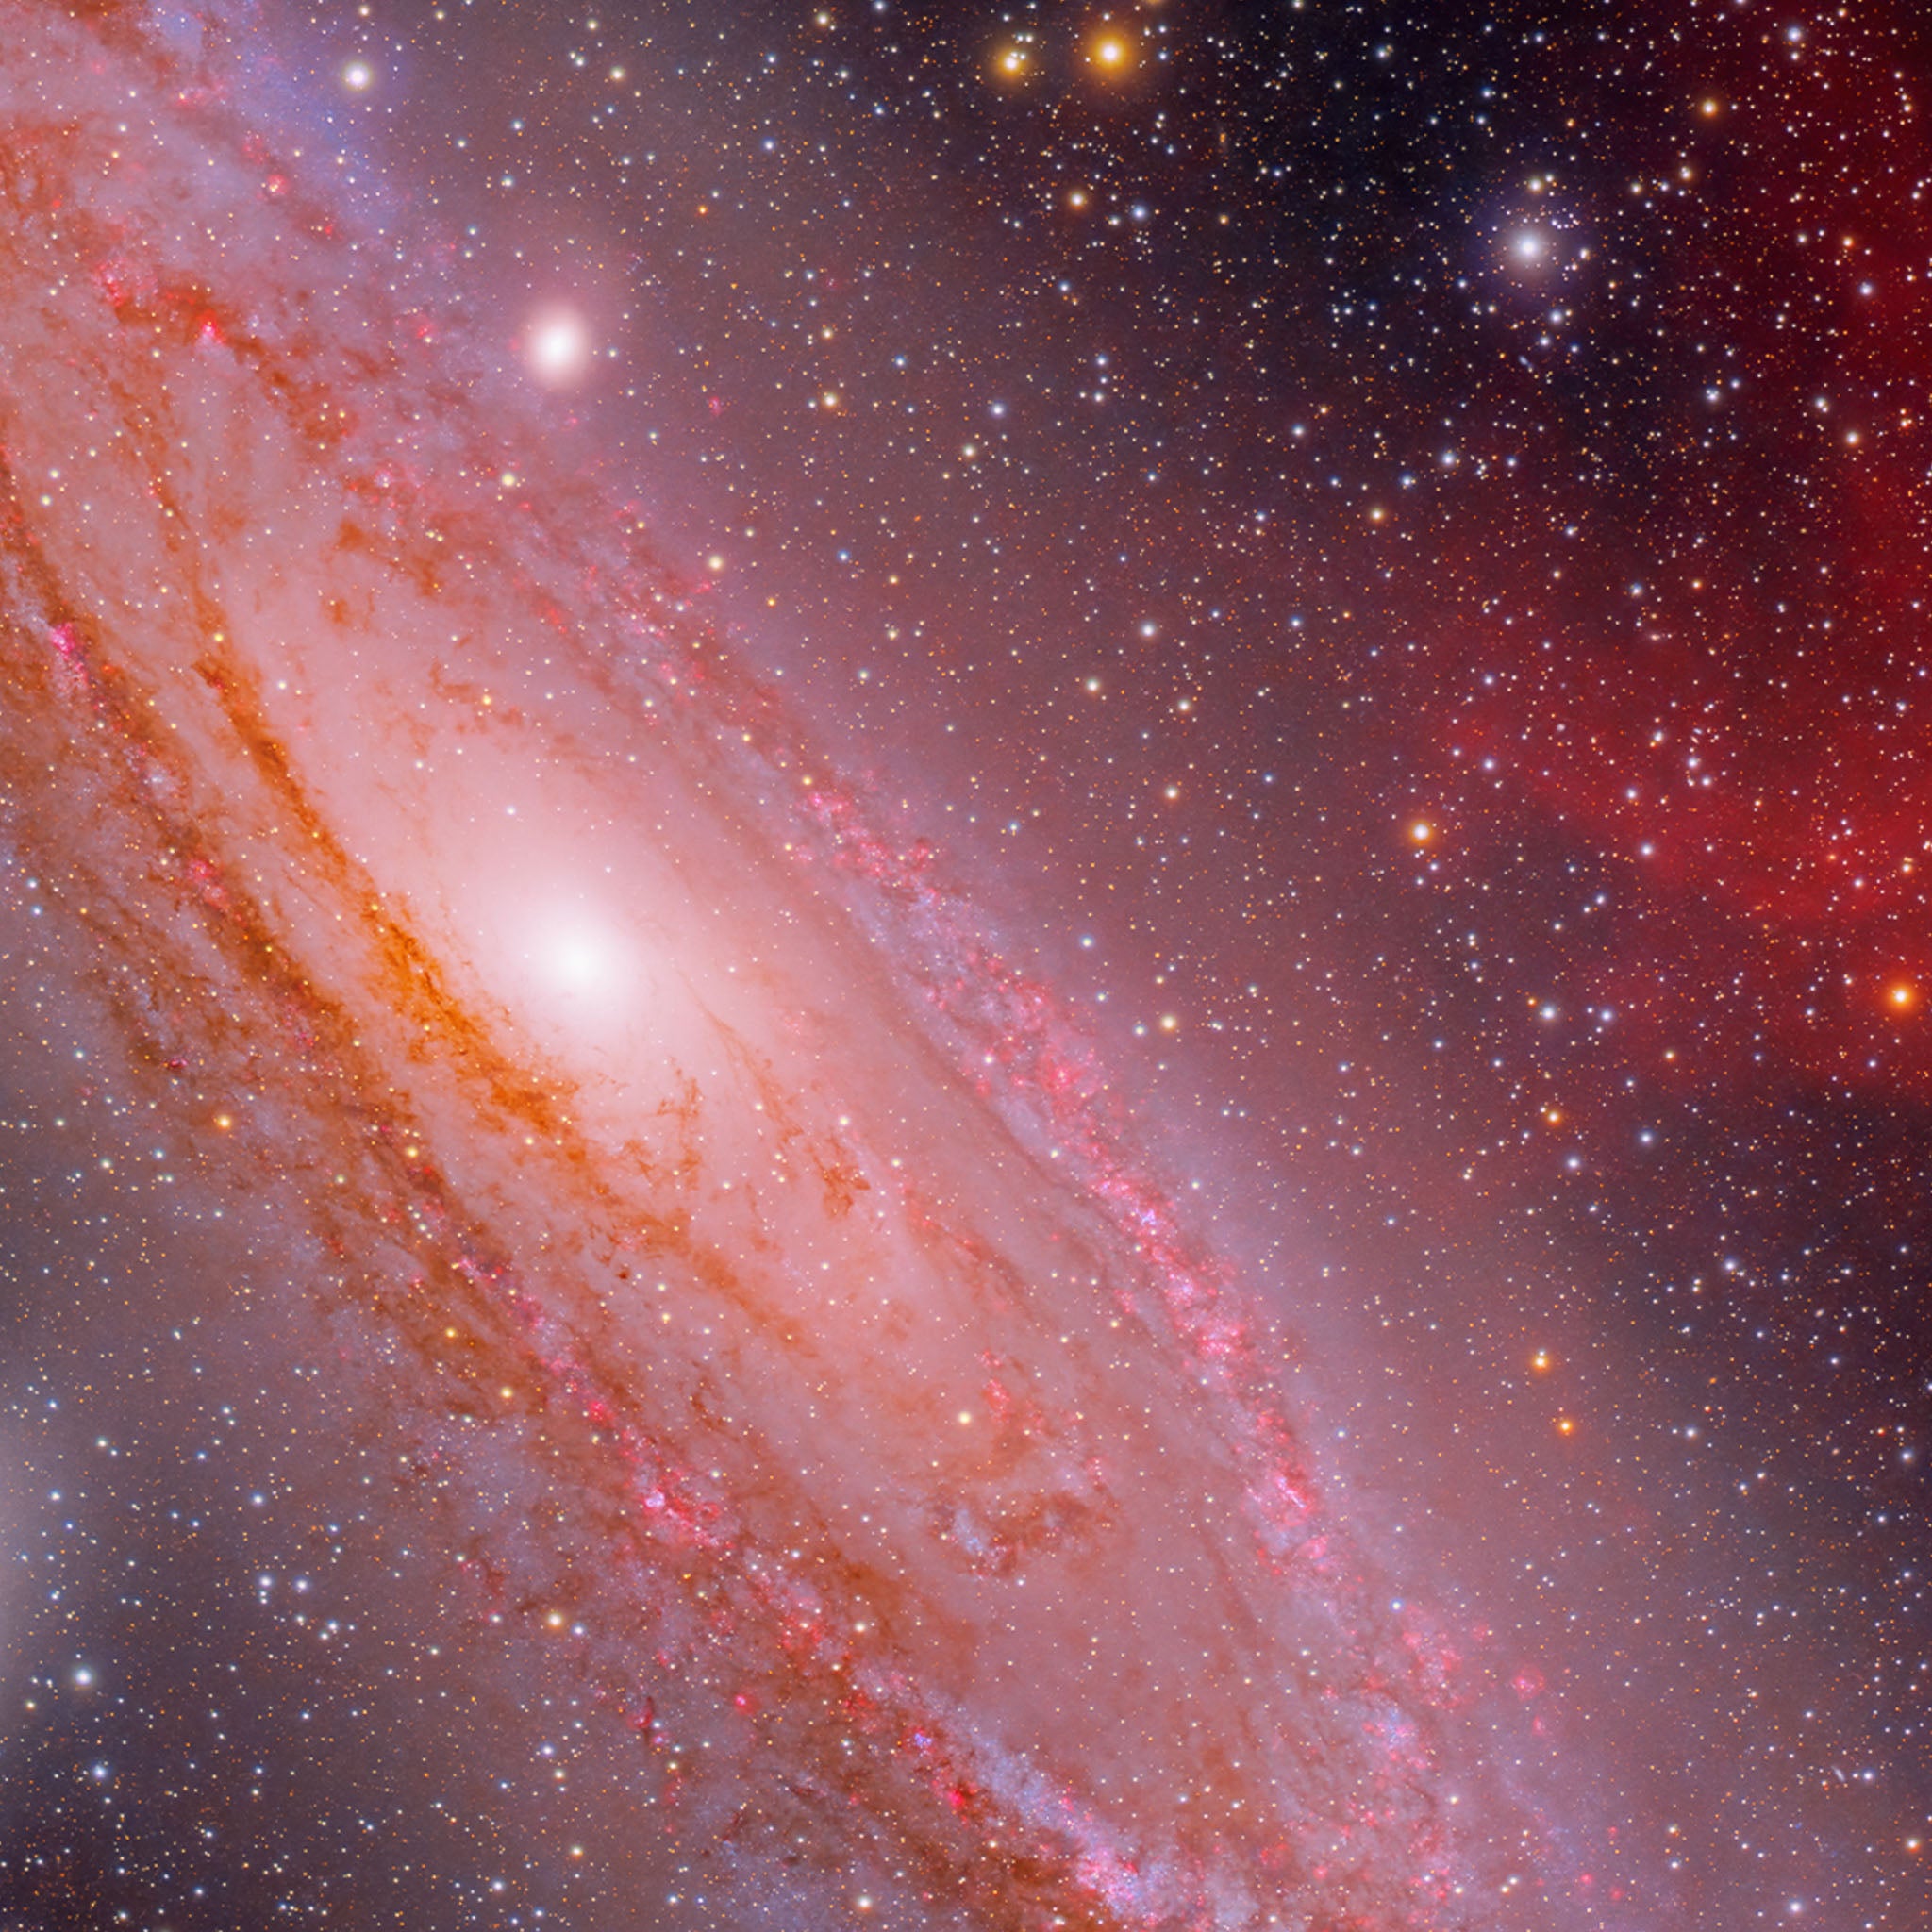 Andromeda Galaxy in Hydrogen Clouds